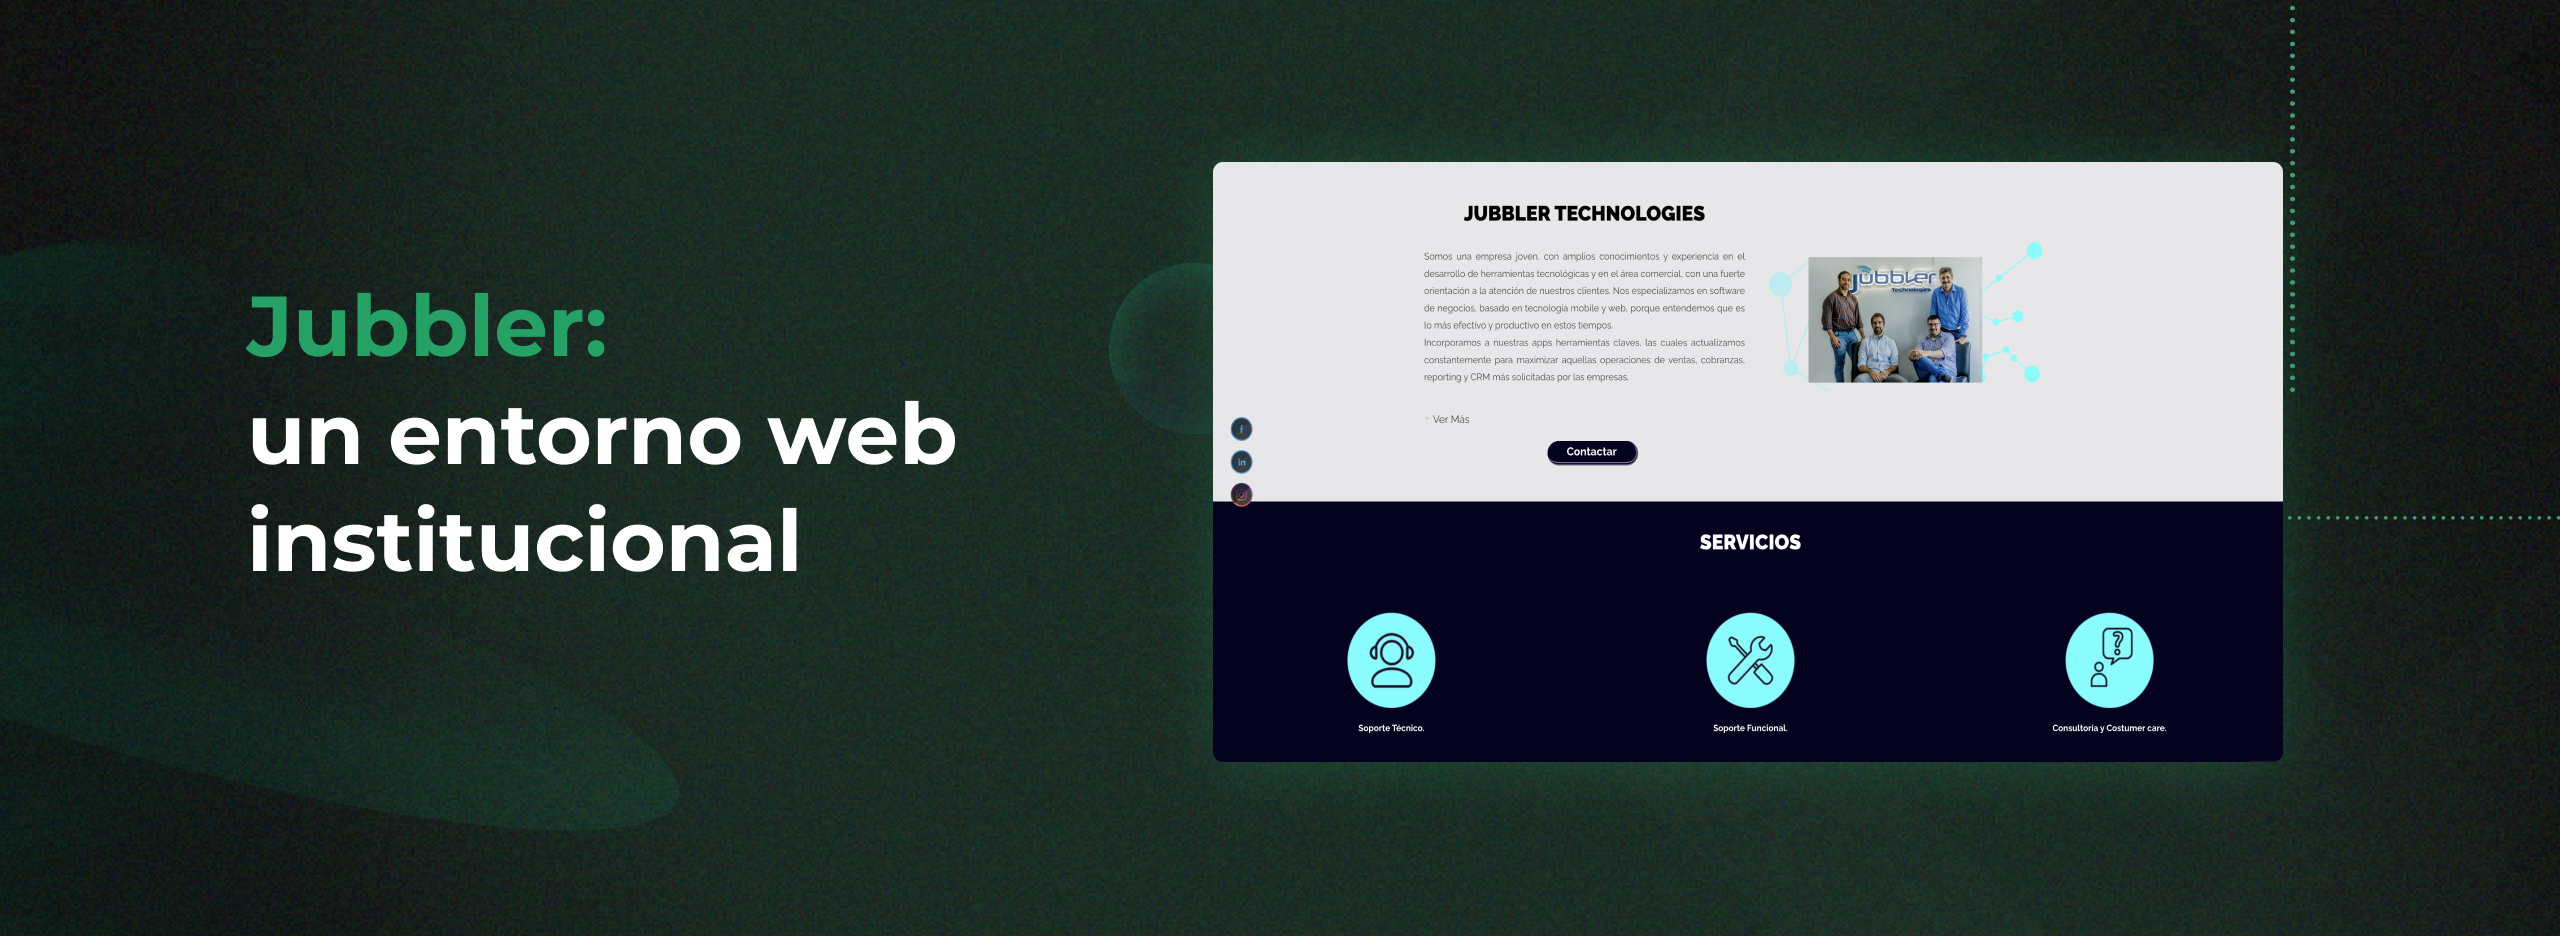 Jubbler: an institutional, modern, and functional website